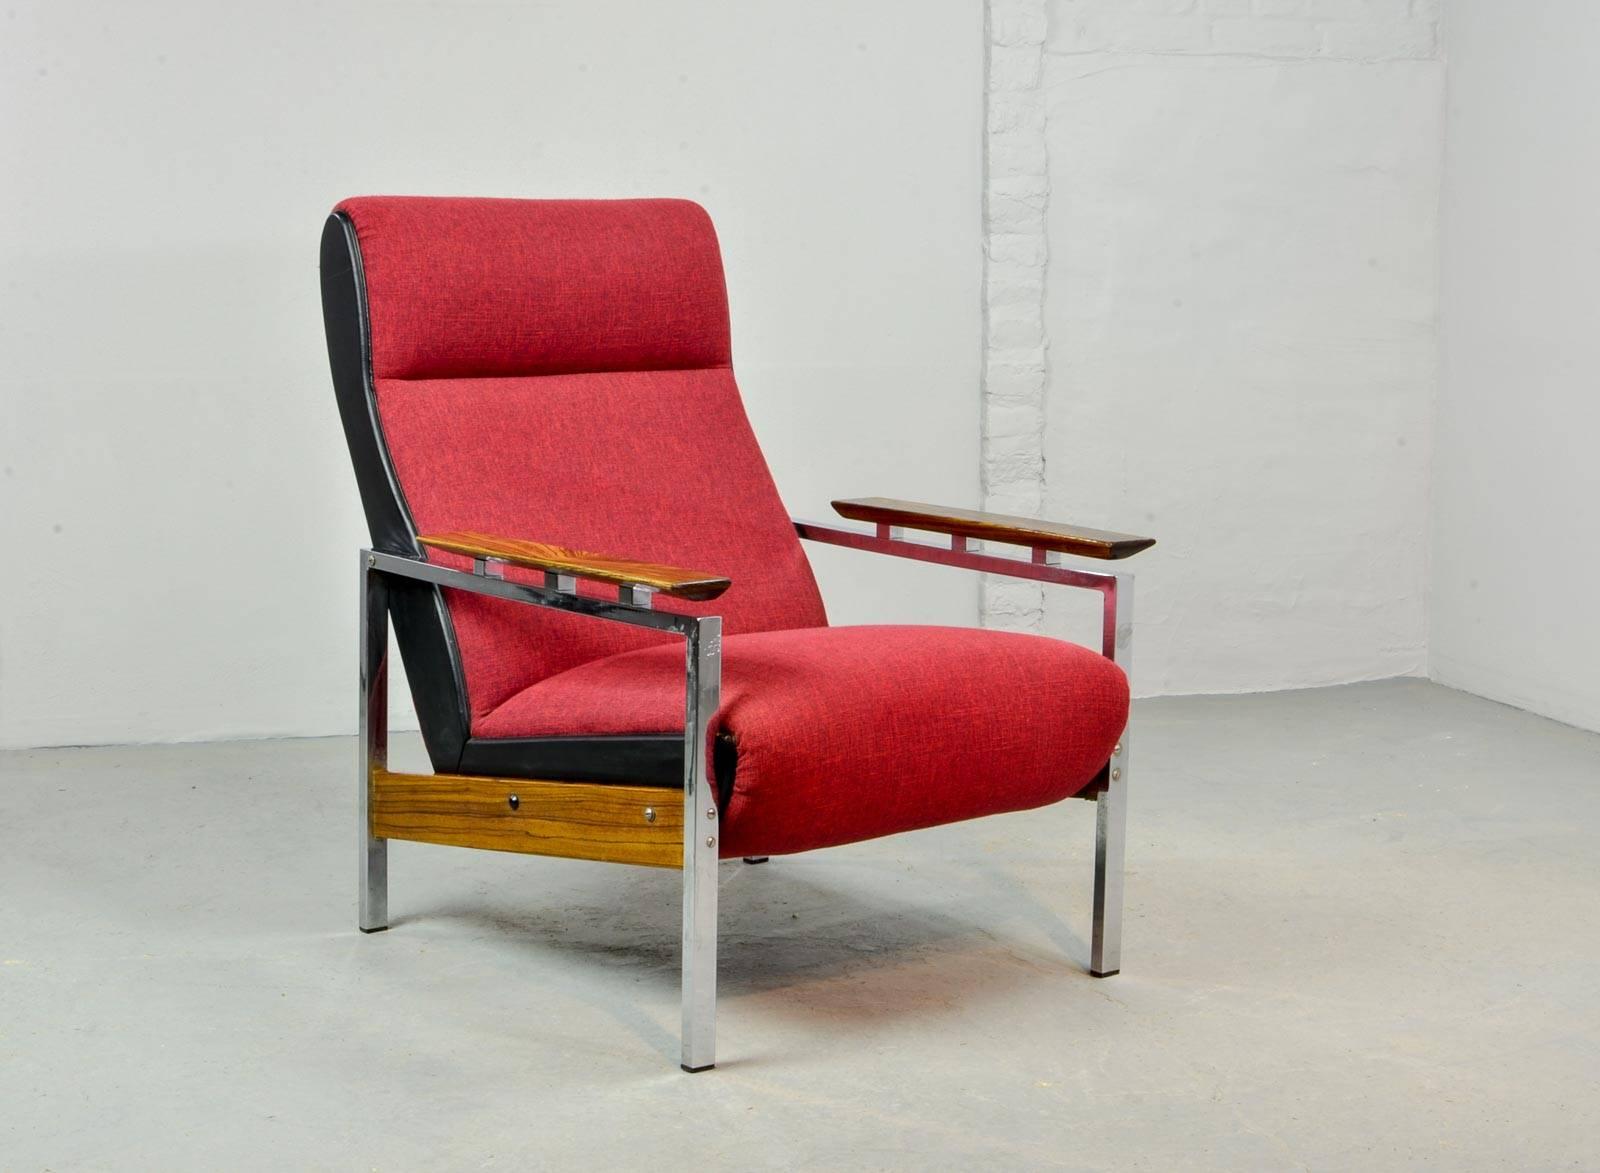 Midcentury Dutch design lounge chair designed by Rob Parry for Gelderland in the 1950s. The chair has new upholstery in a beautiful burgundy-cherry red fabric and chrome steel base with rosewood and black leatherette elements.